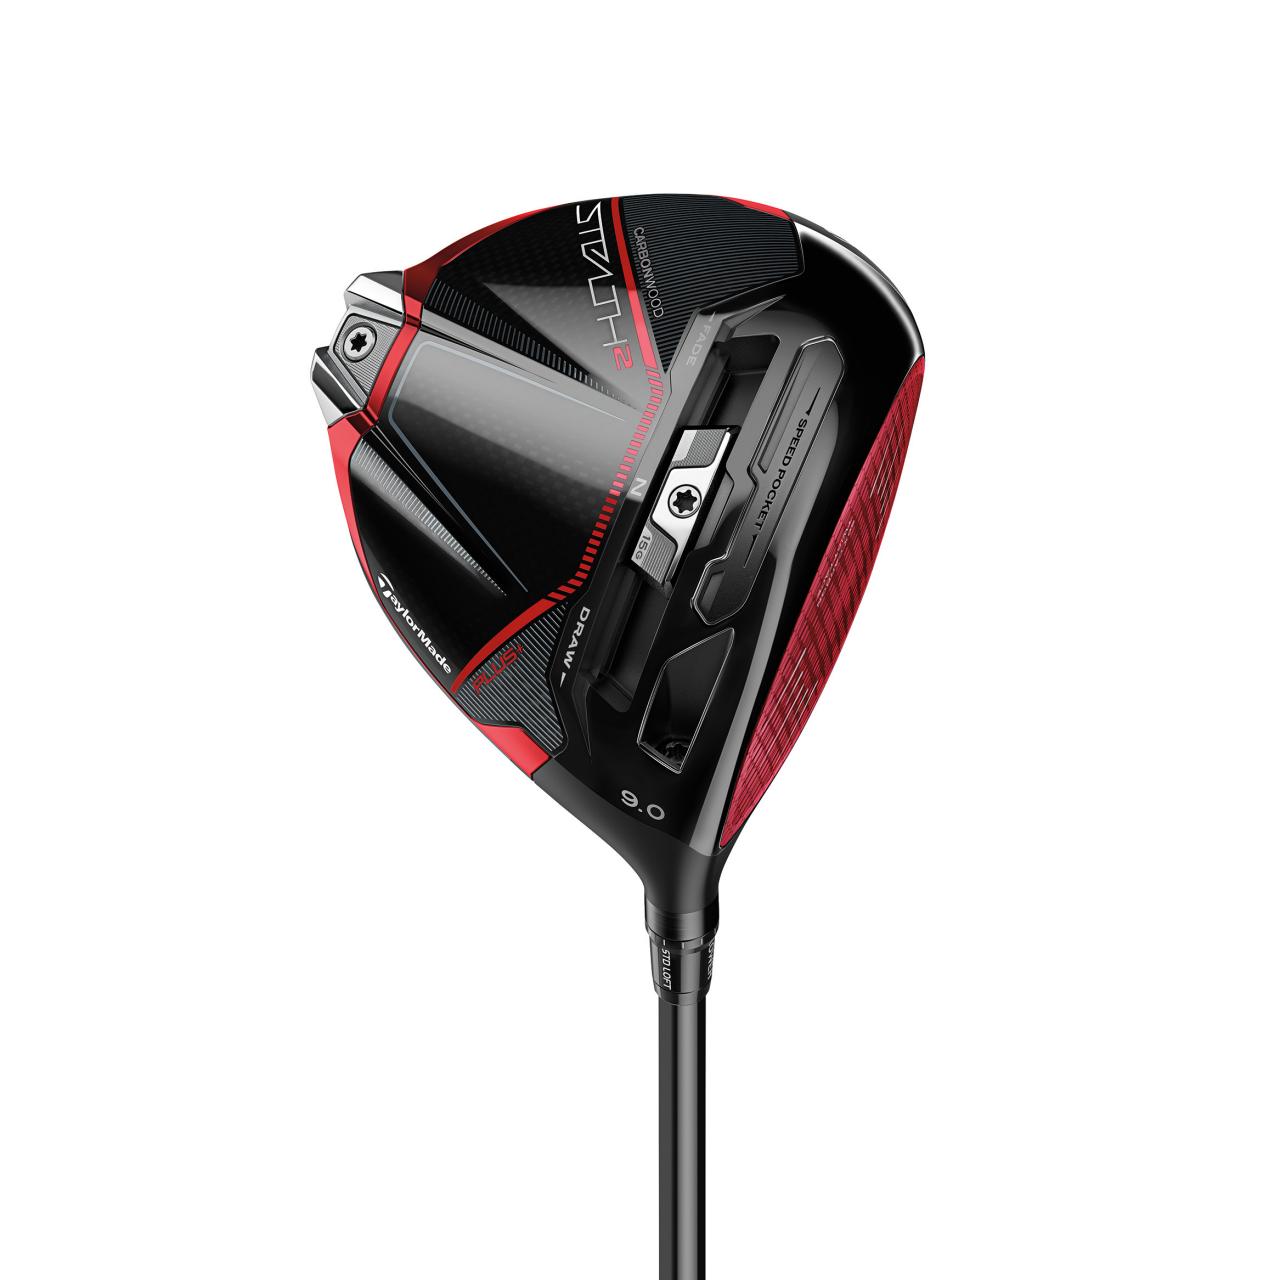 TaylorMade's new drivers start out too fast for the rules of golf